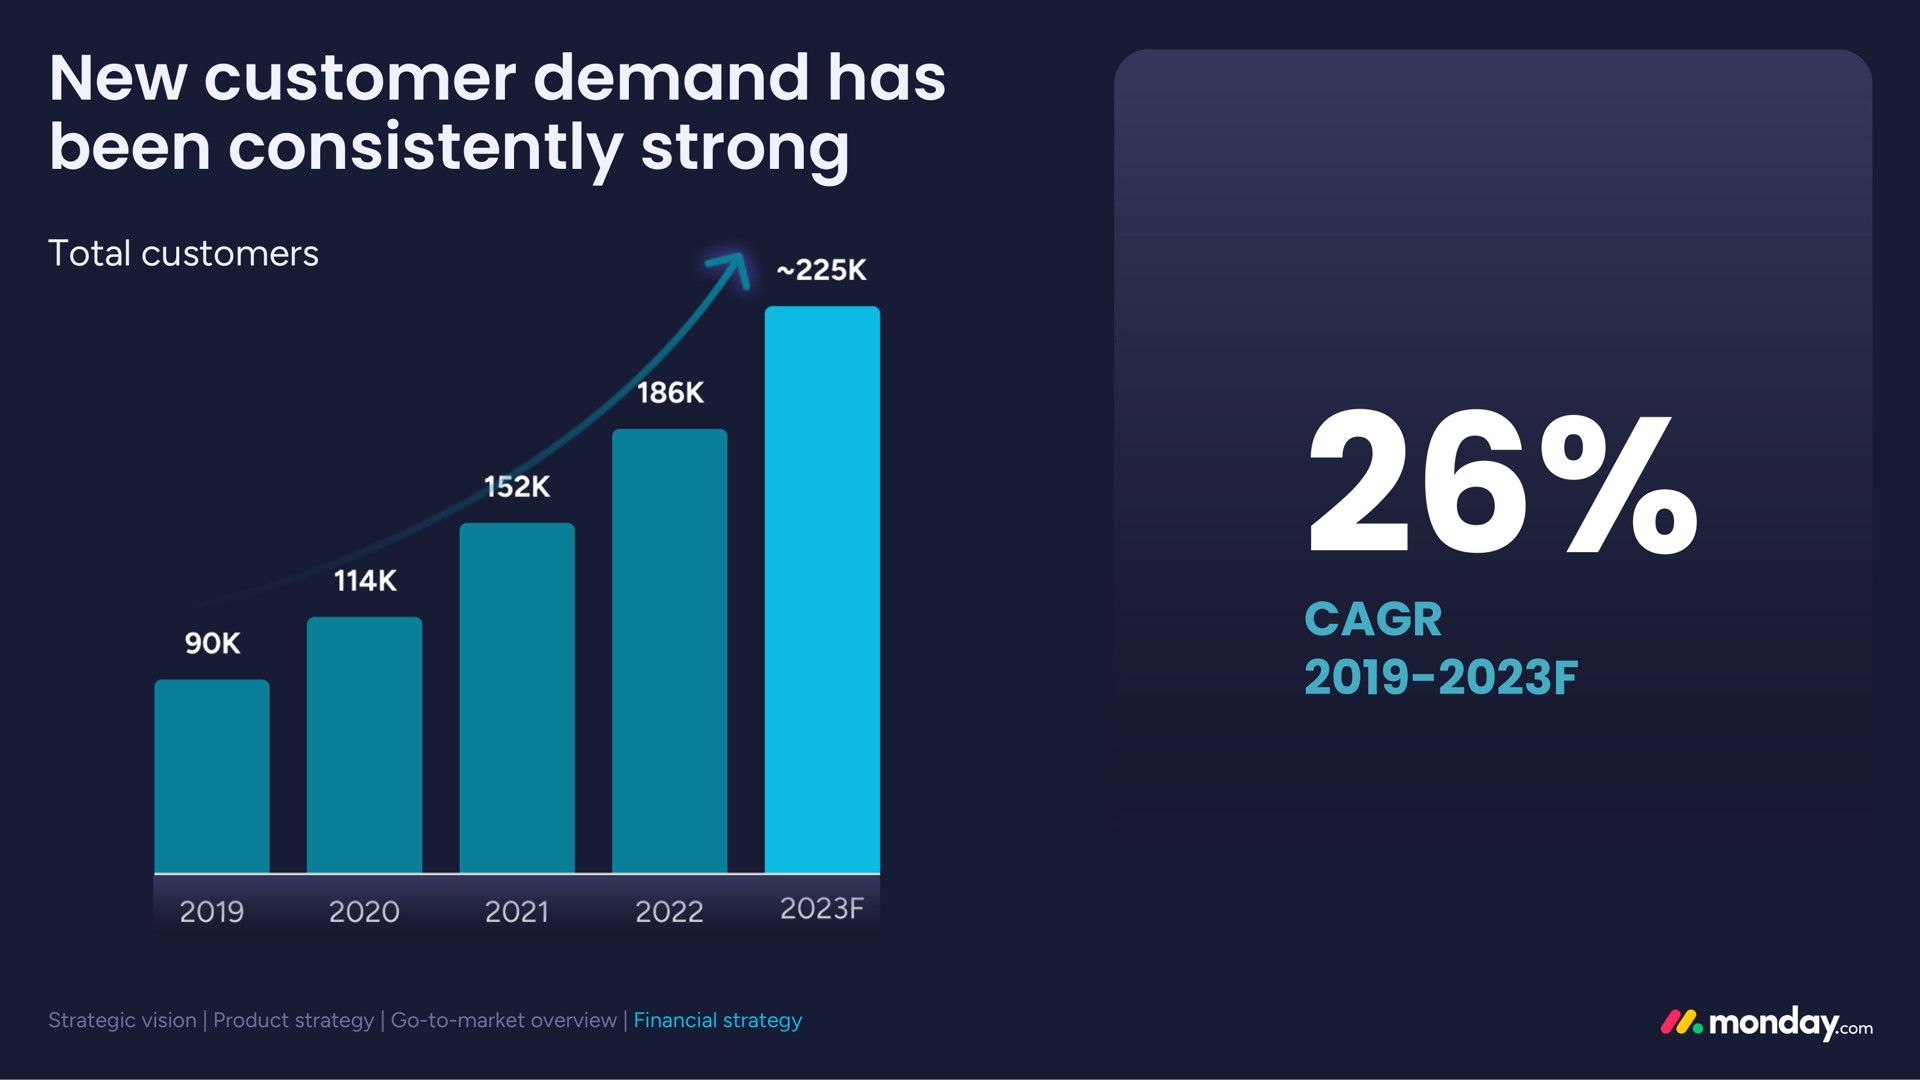 new customer demand has been consistently strong | monday.com